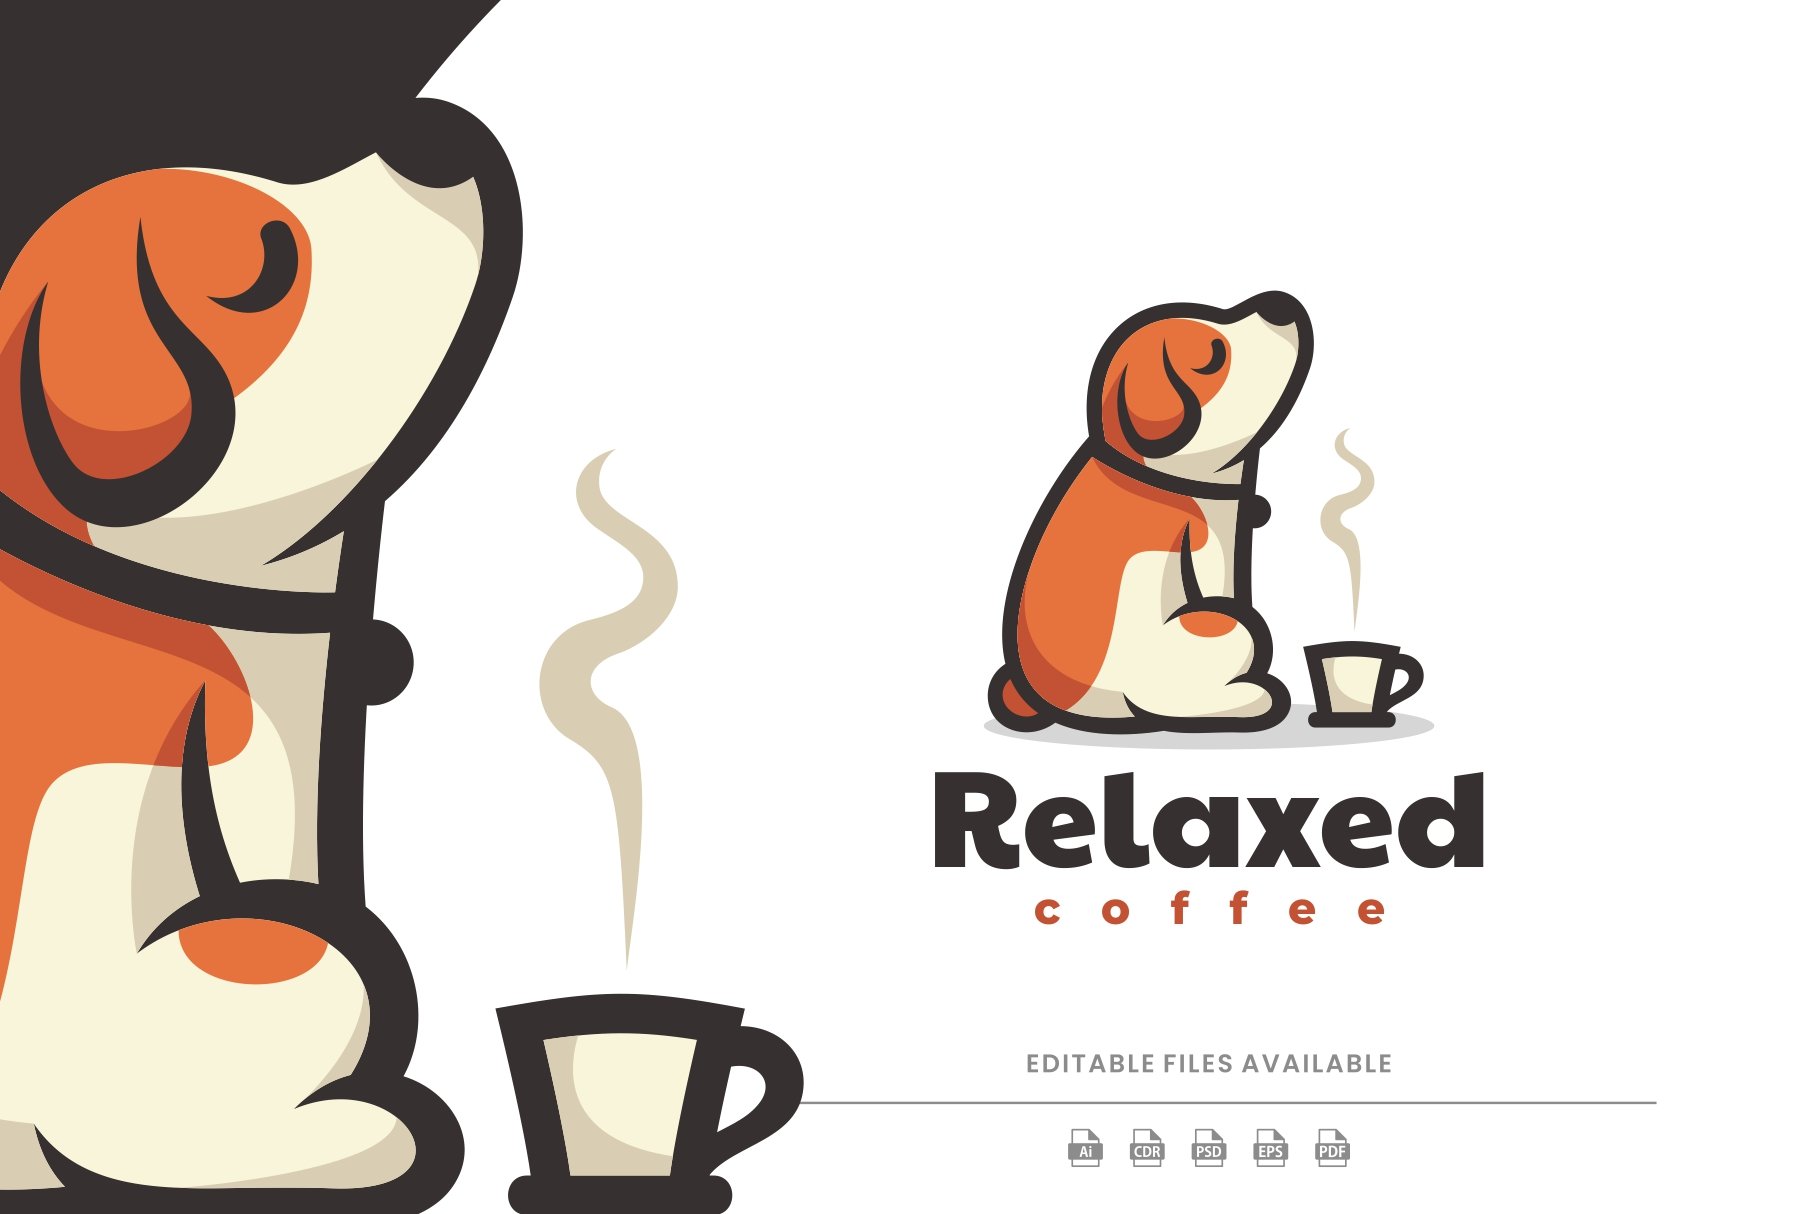 Relaxing Dog Mascot Logo cover image.